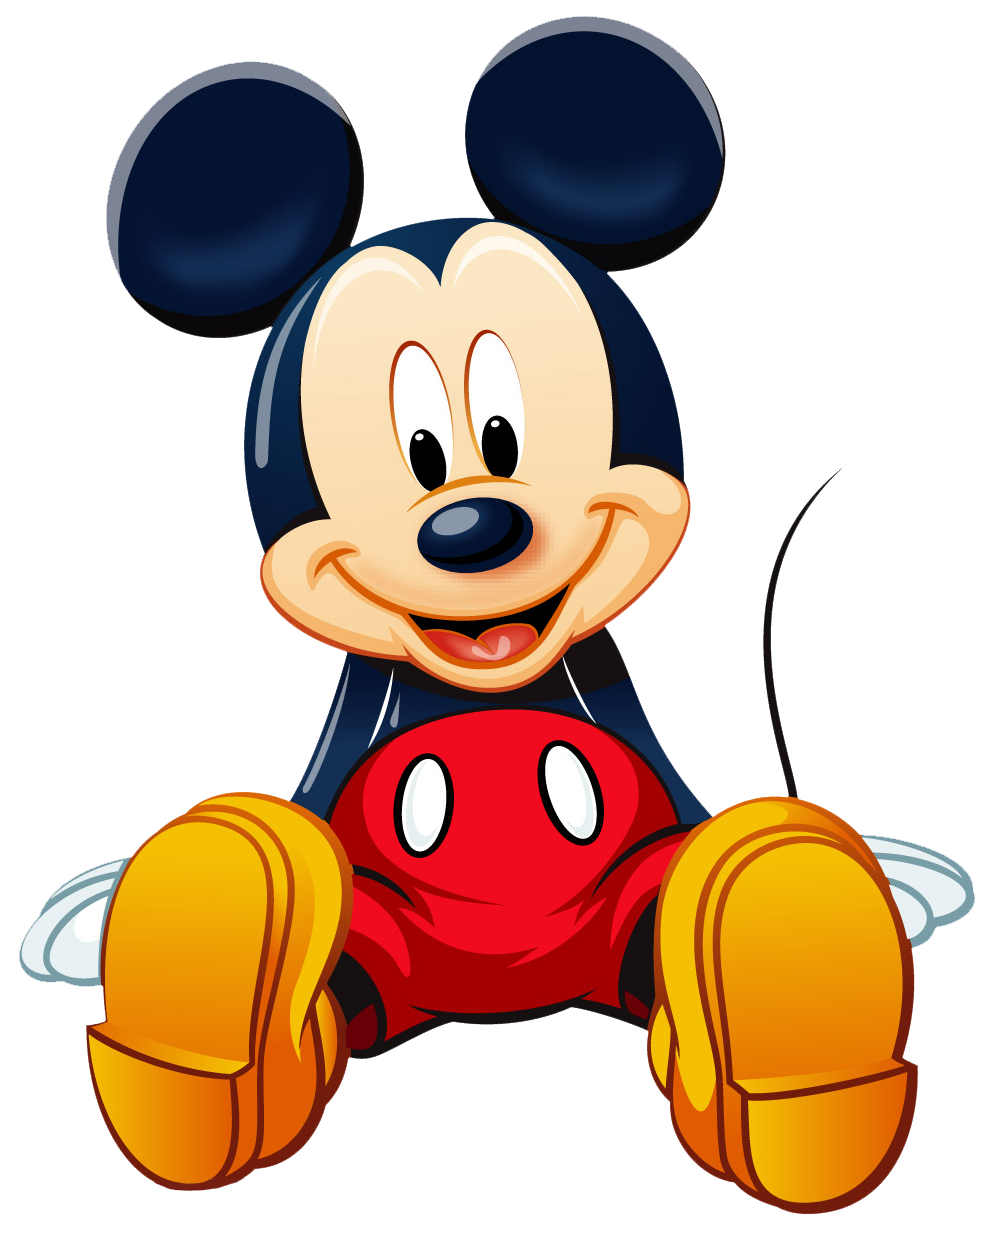 Photo Editing Material : Micky Mouse PNG